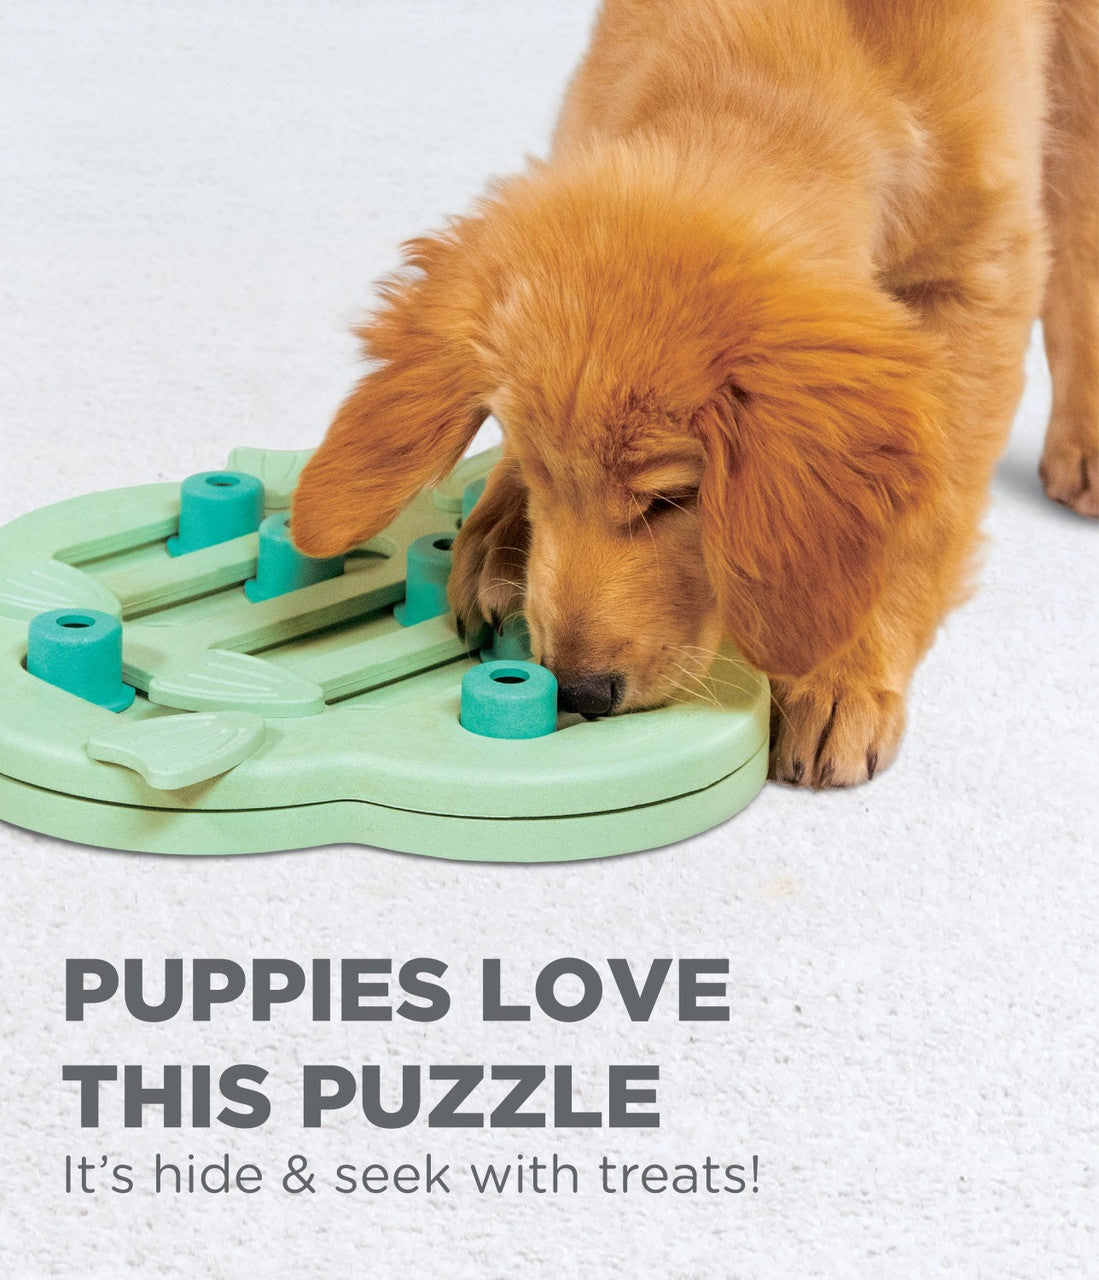 Outward Hound Hide N' Slide Interactive Treat Puzzle For Dogs